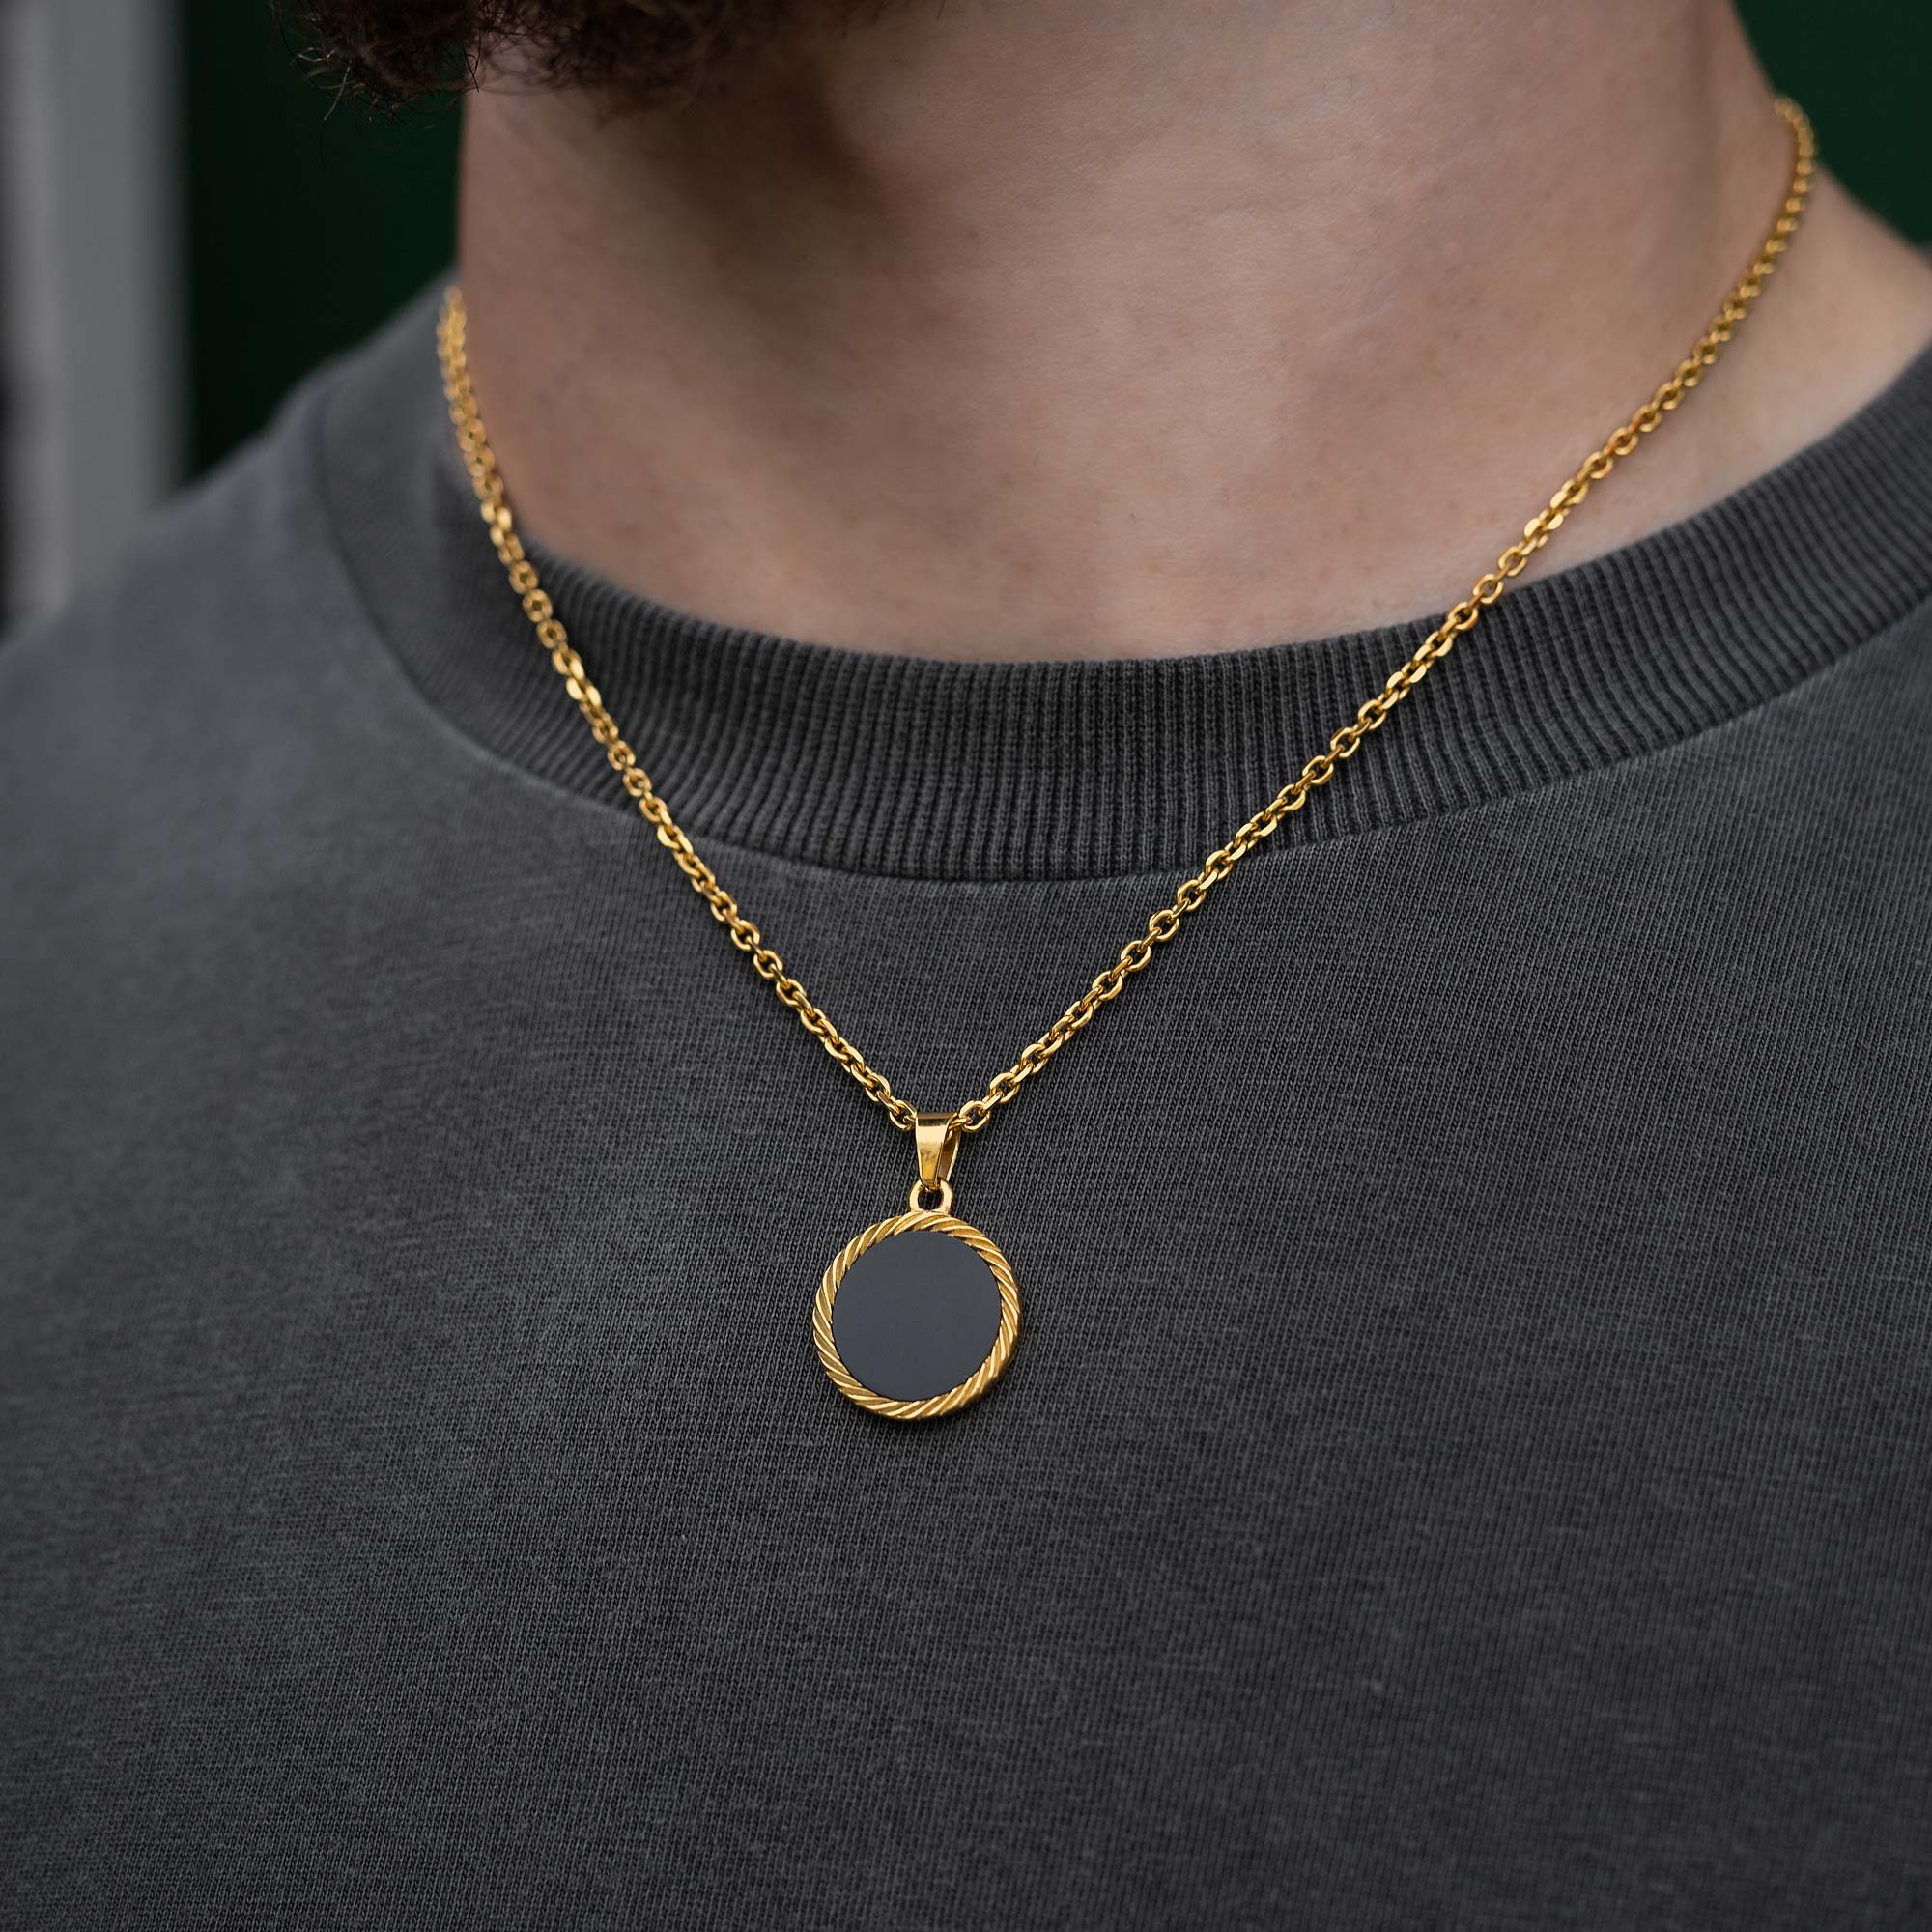 Circular Onyx Stone Pendant necklace in gold on body